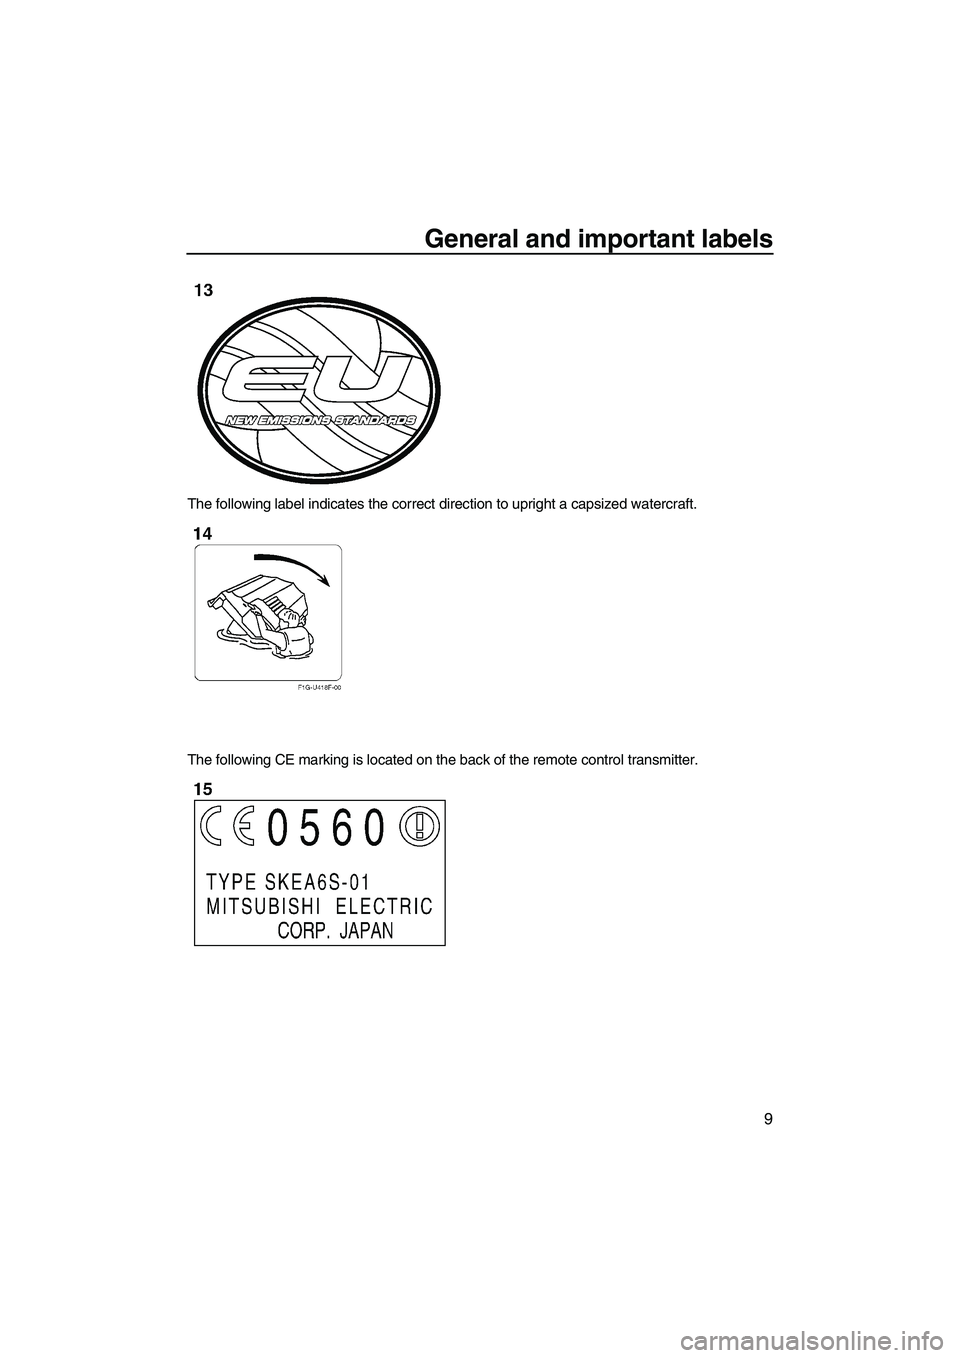 YAMAHA VXS 2012 User Guide General and important labels
9
The following label indicates the correct direction to upright a capsized watercraft.
The following CE marking is located on the back of the remote control transmitter.
